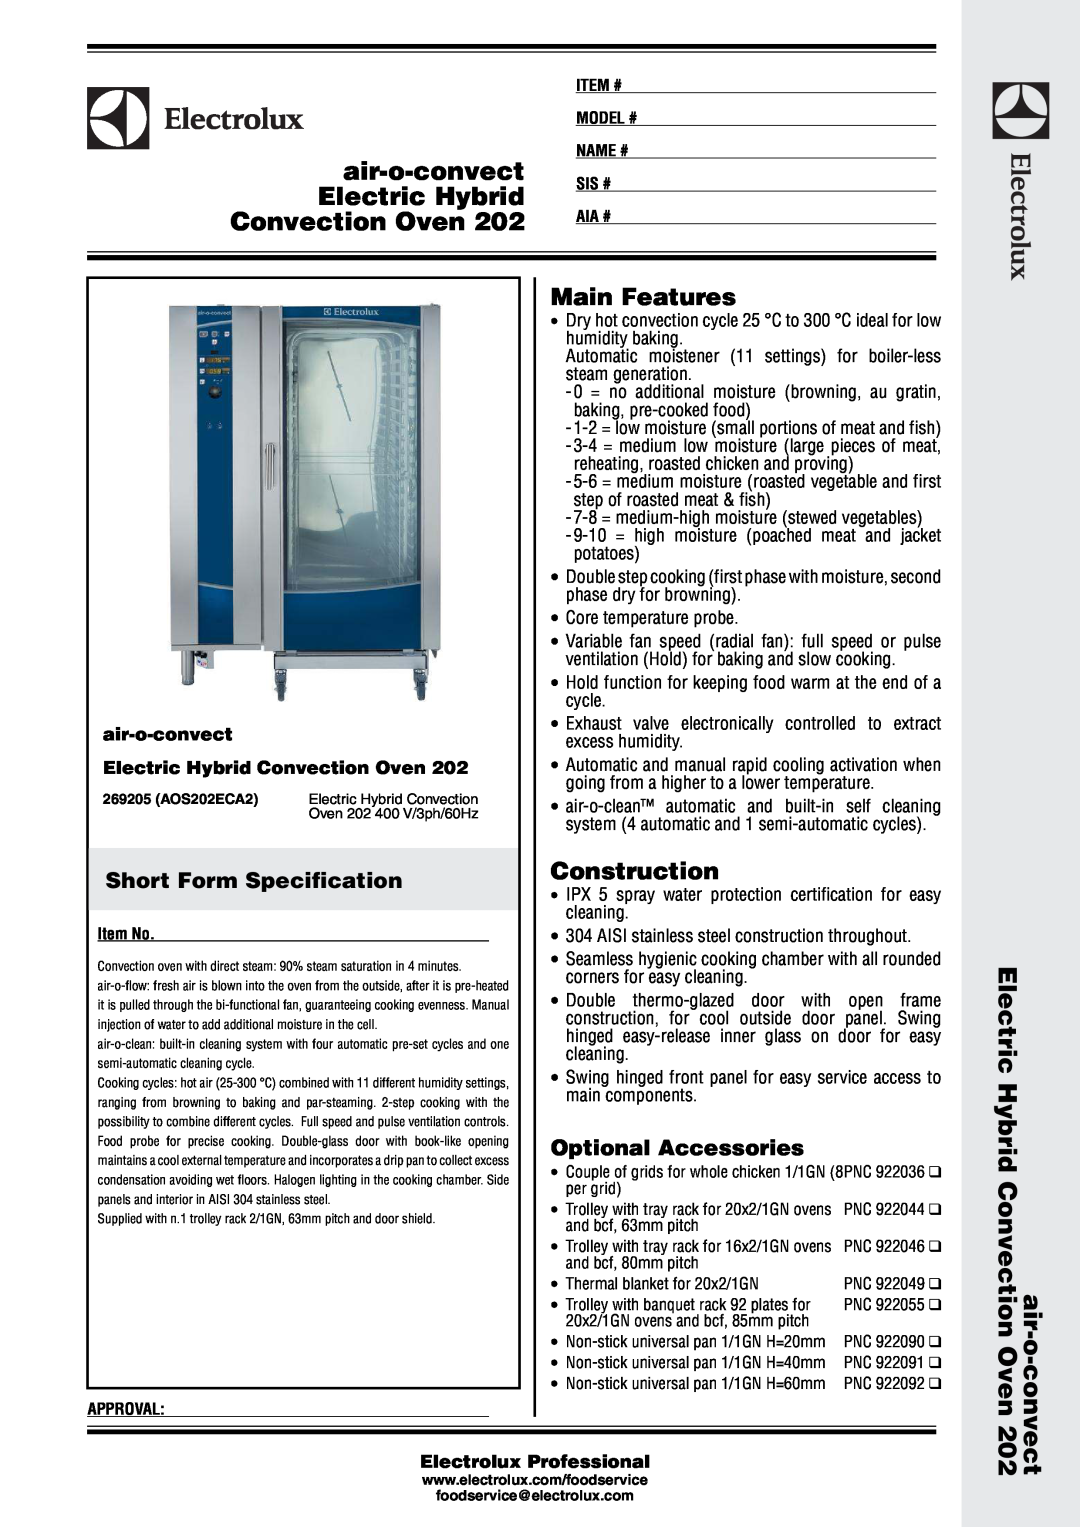 Electrolux 202 warranty Short Form Speciﬁcation, air-o-steam, TOUCHLINE Electric Combi Oven, Electrolux Professional 